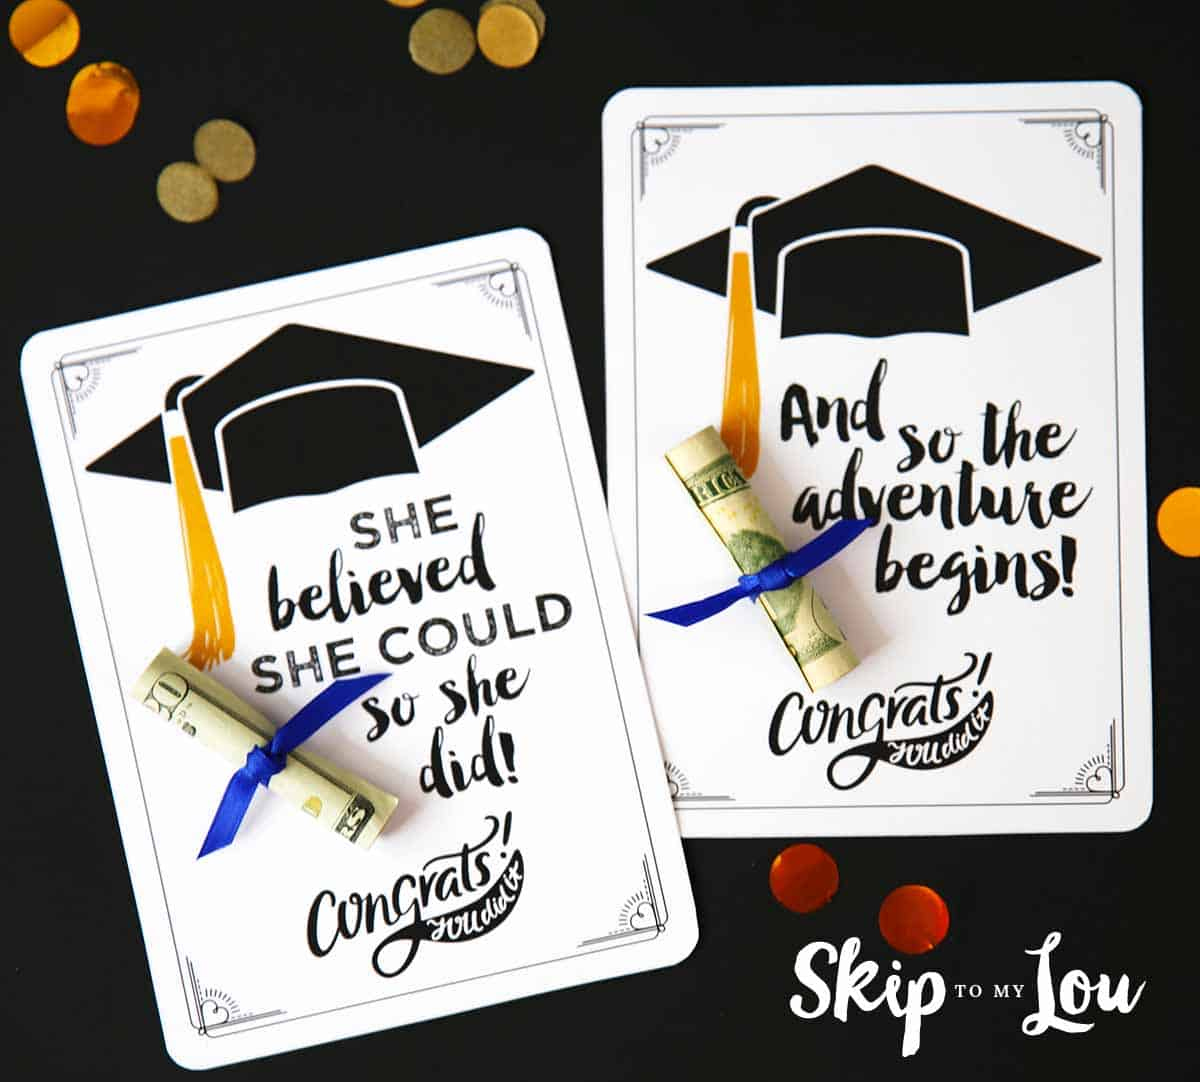 Free Graduation Cards With Positive Quotes And Cash! for Free Printable Graduation Cards